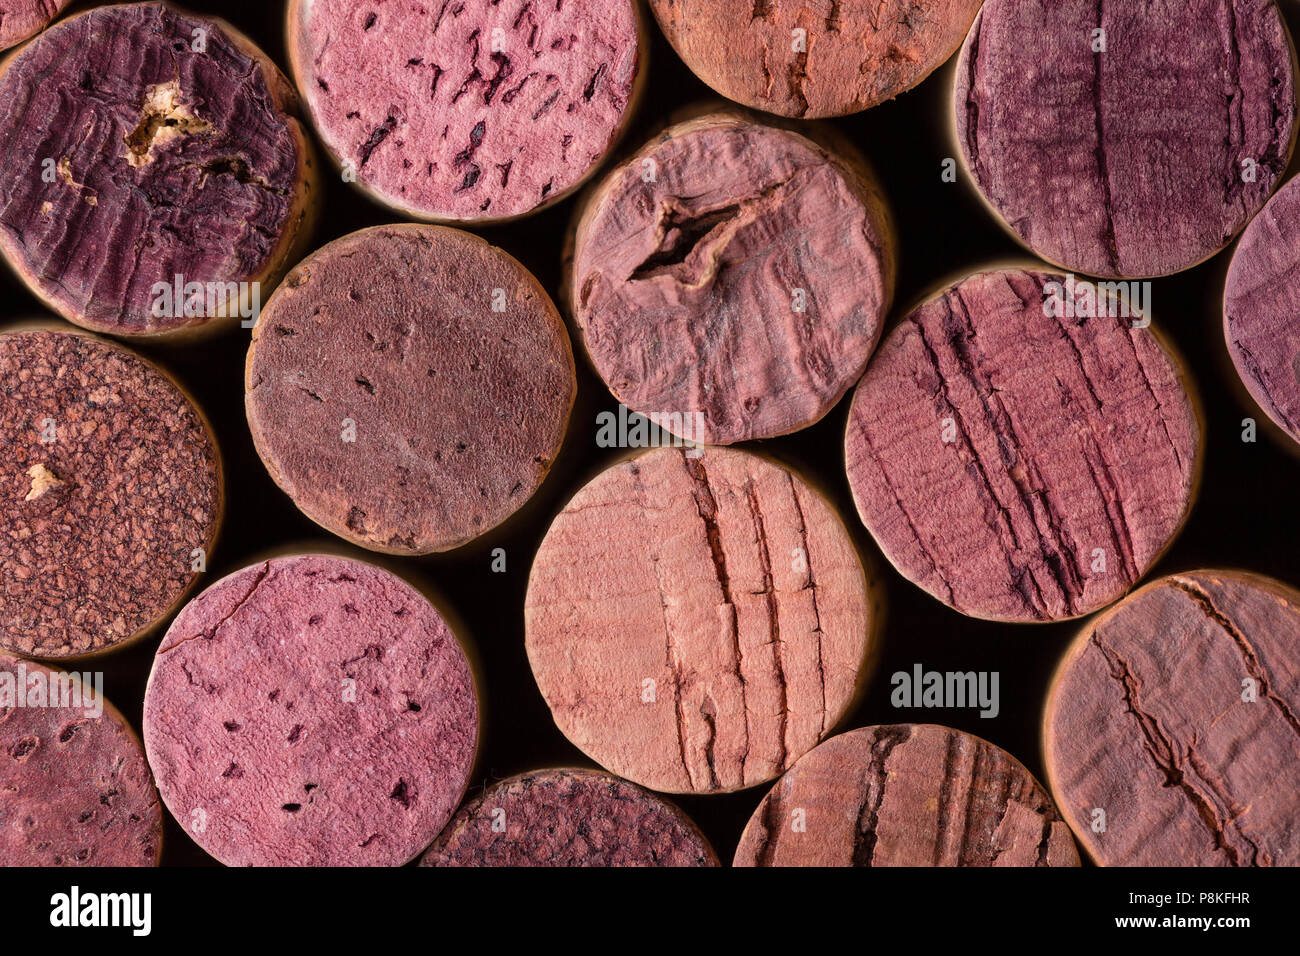 Full frame with wine corks in close up view Stock Photo